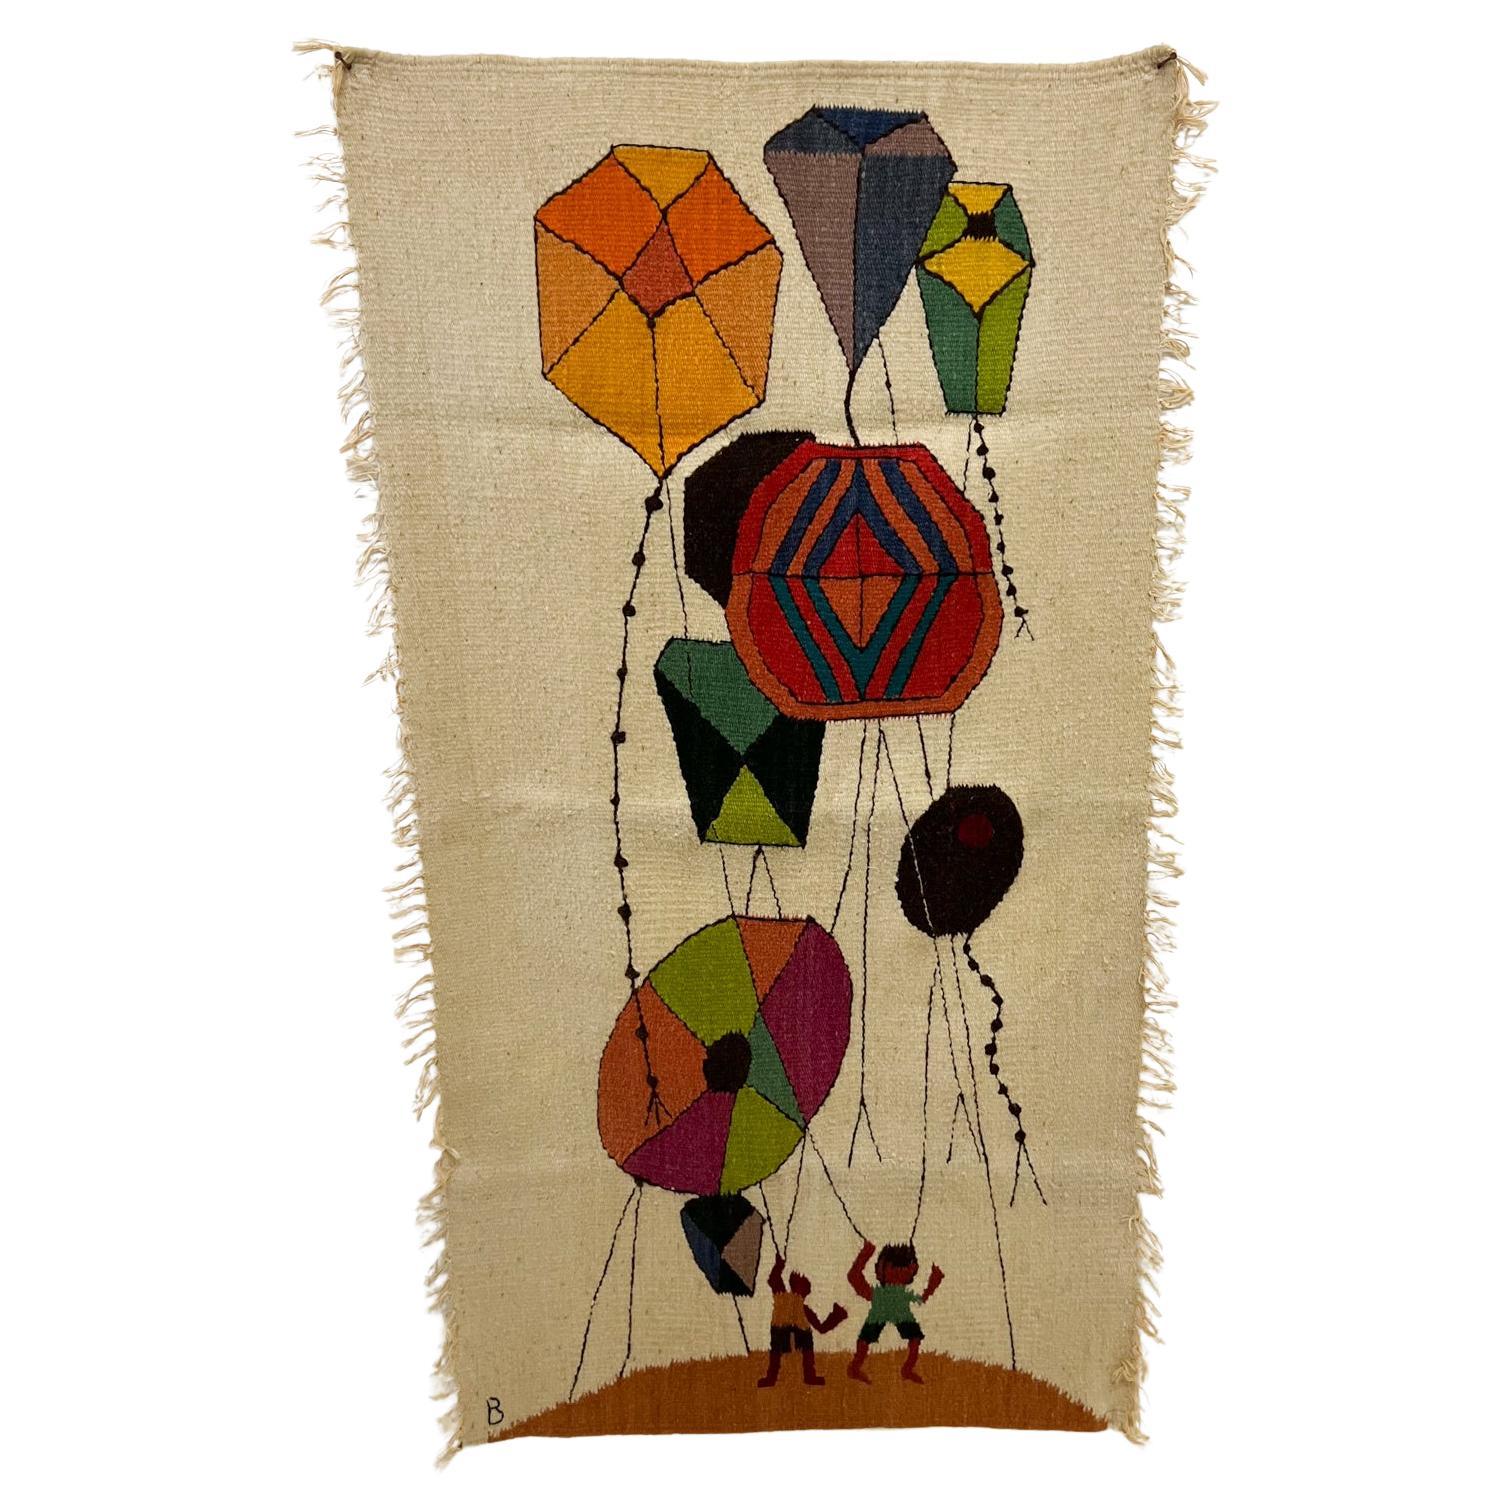 1960s Wall Tapestry Art Modern Graphic Child with Kite in Style of Evelyn Ackerman
Textile Art
Signed B
50.5 x 29
Preowned original vintage condition.
See images please.